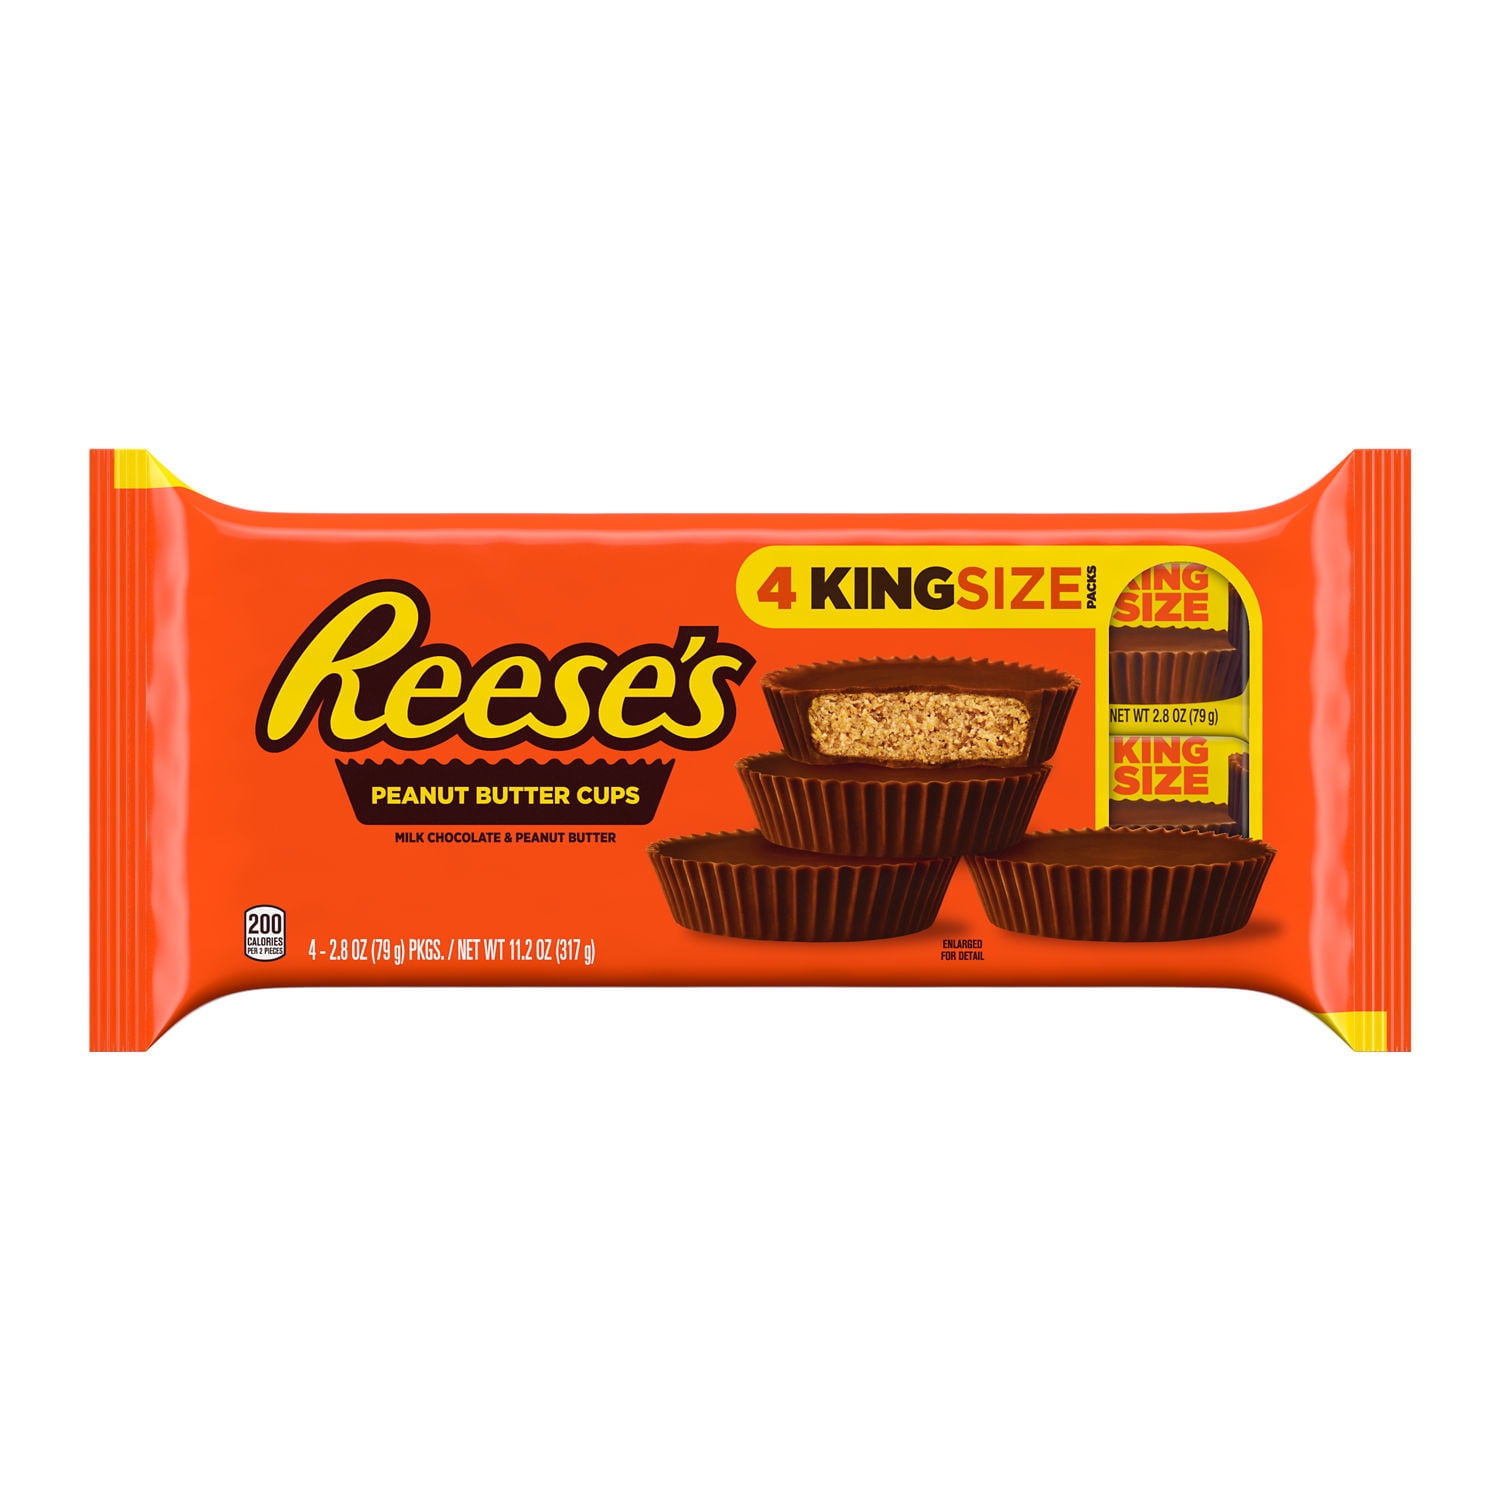 REESE'S, Milk Chocolate Peanut Butter Cups Candy, Gluten Free, 2.8 oz, King Size Packs (4 Count)